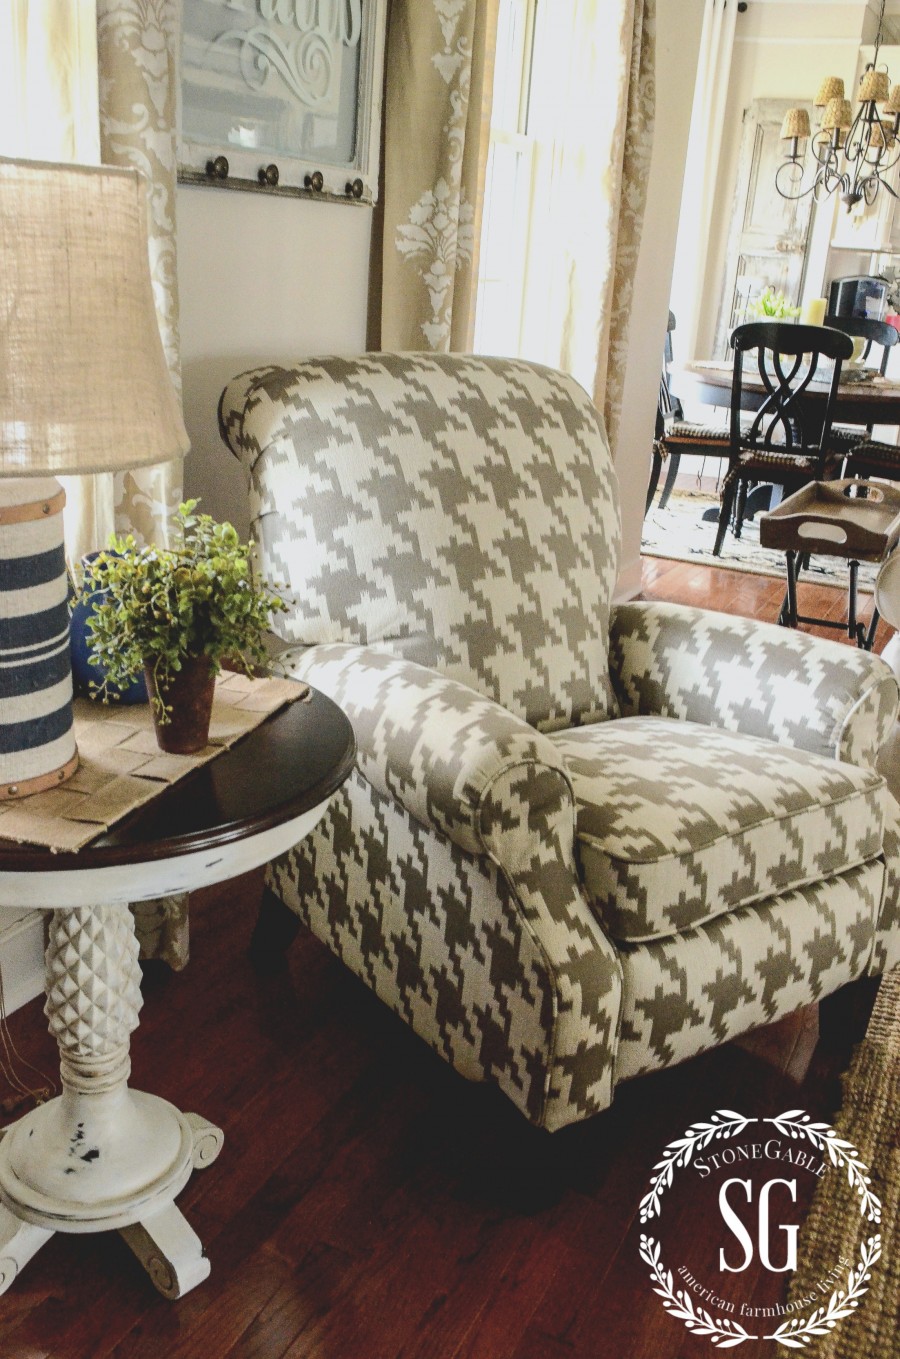 6 TIPS FOR CHOOSING THE PERFECT CHAIR. Good to know tips for finding the perfect chair for your home.